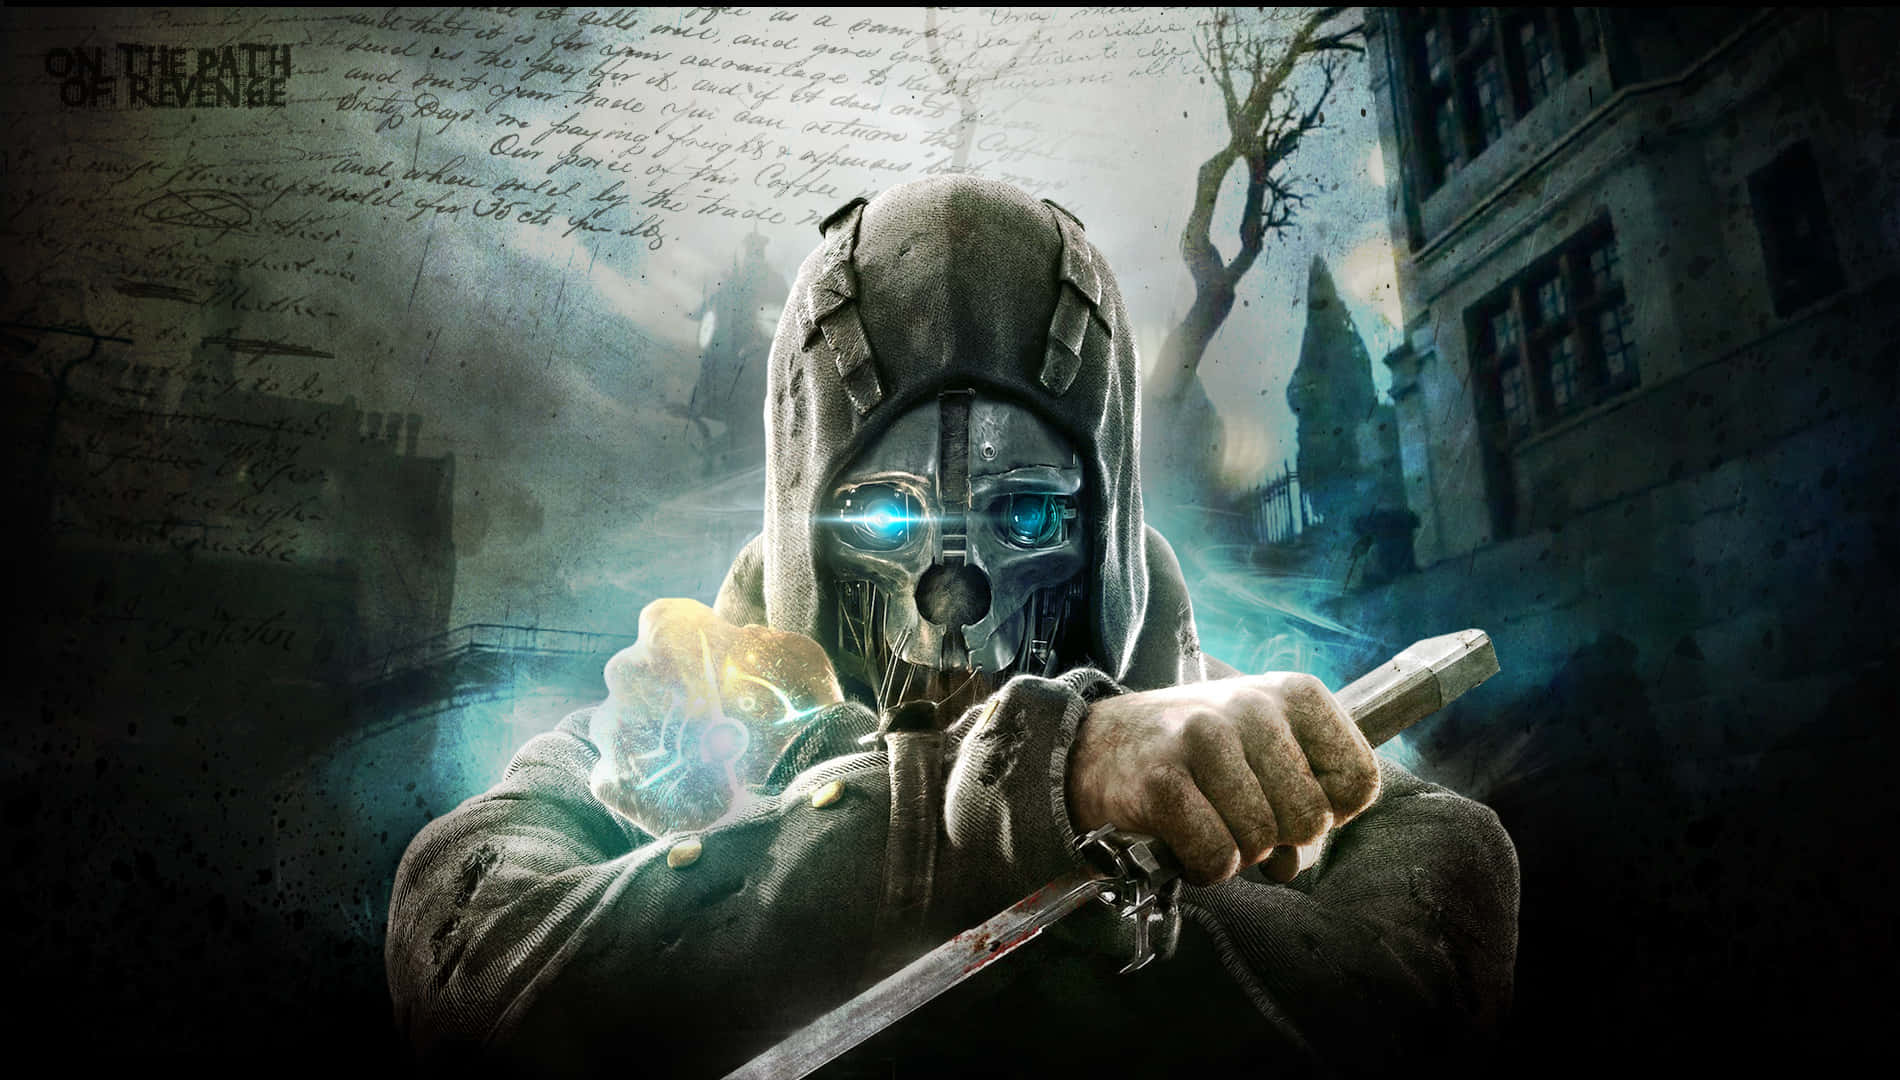 Image  Dishonored 2 - The Return of a Classic